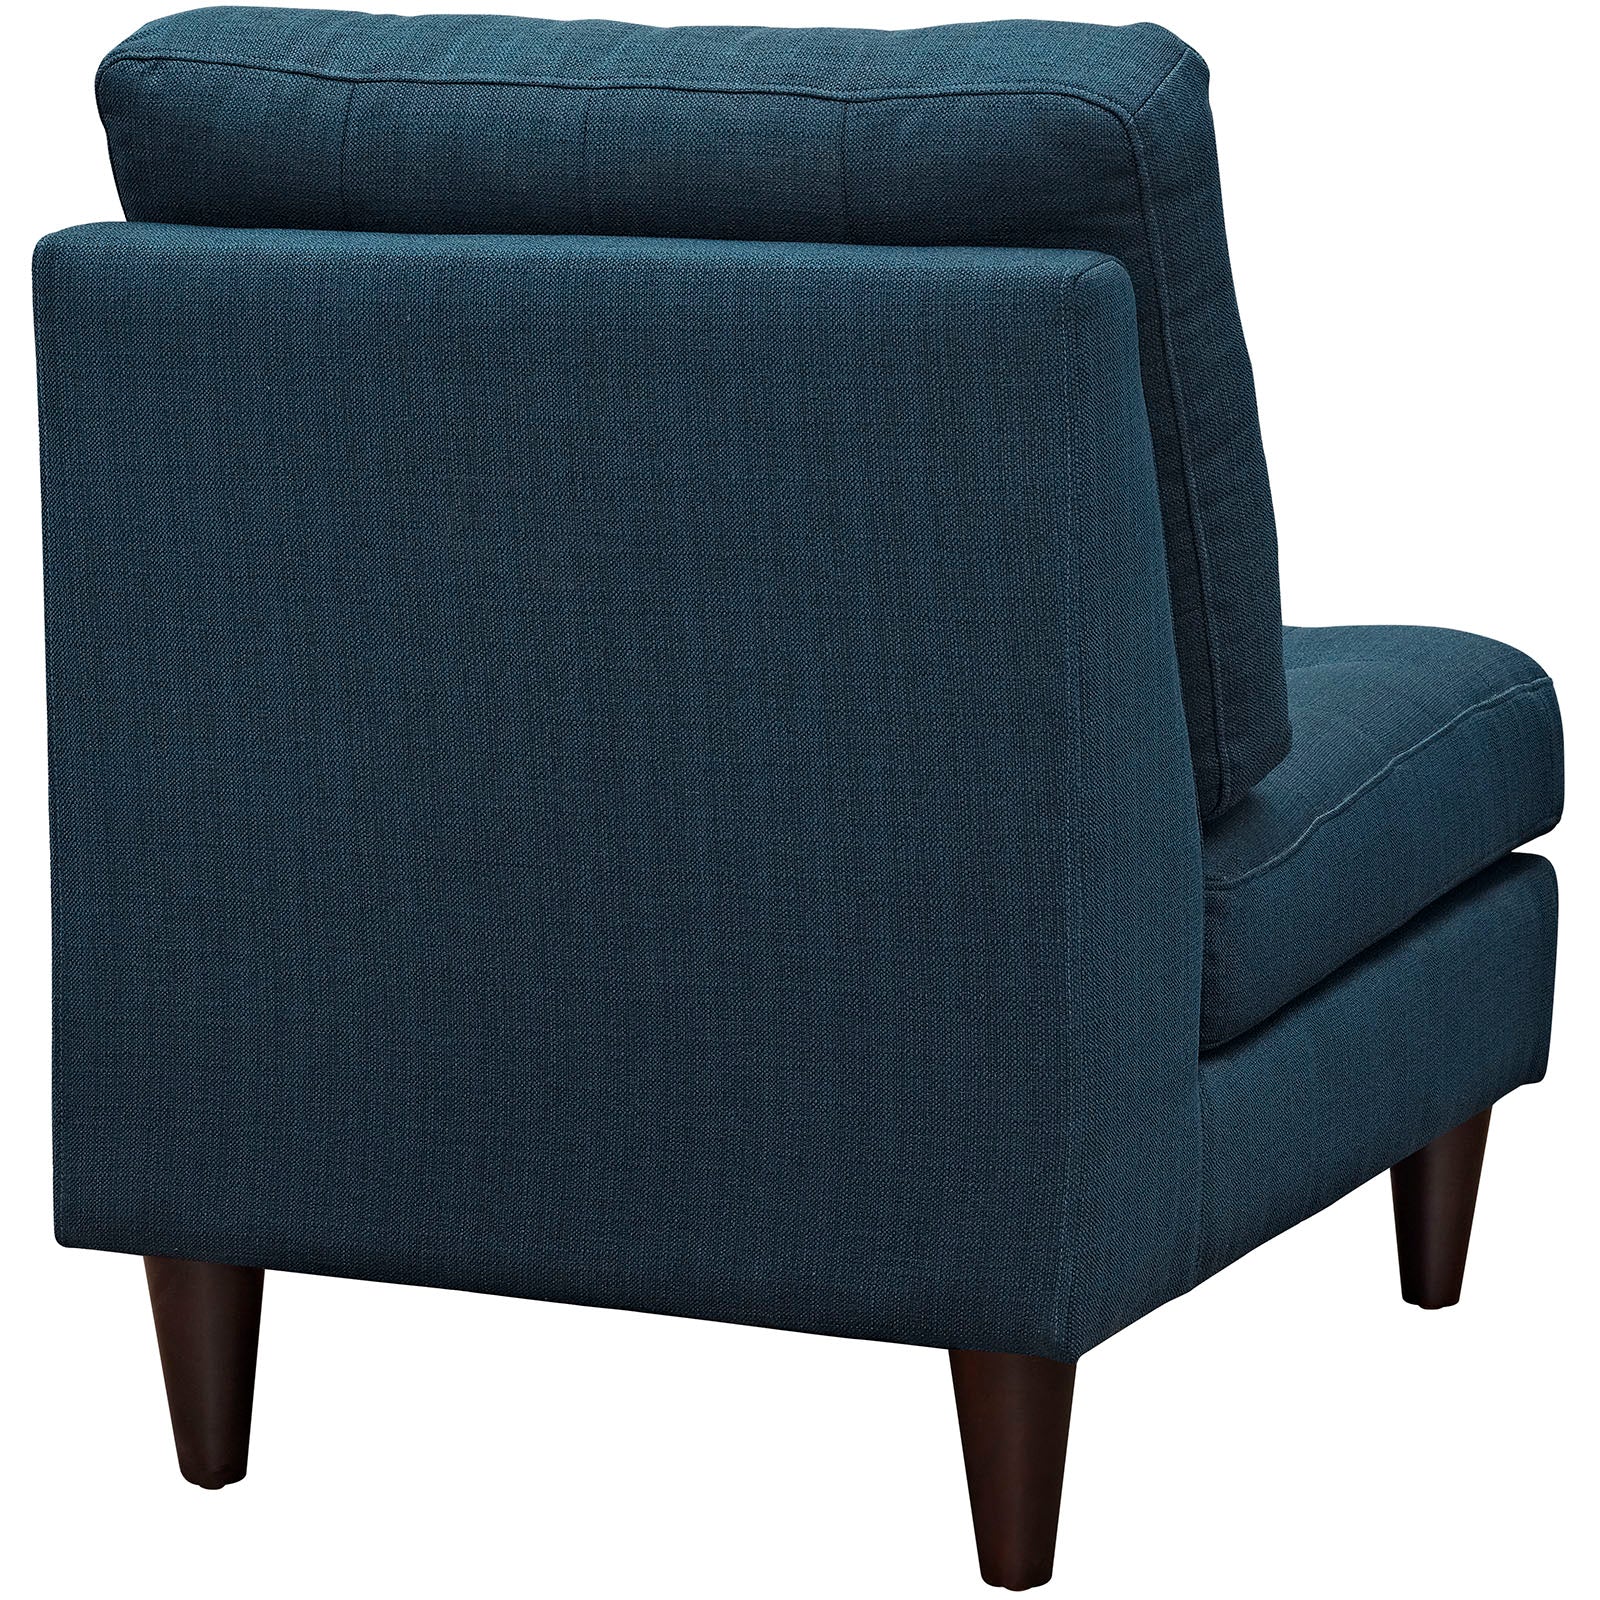 Modway Accent Chairs - Empress Upholstered Fabric Lounge Chair Azure